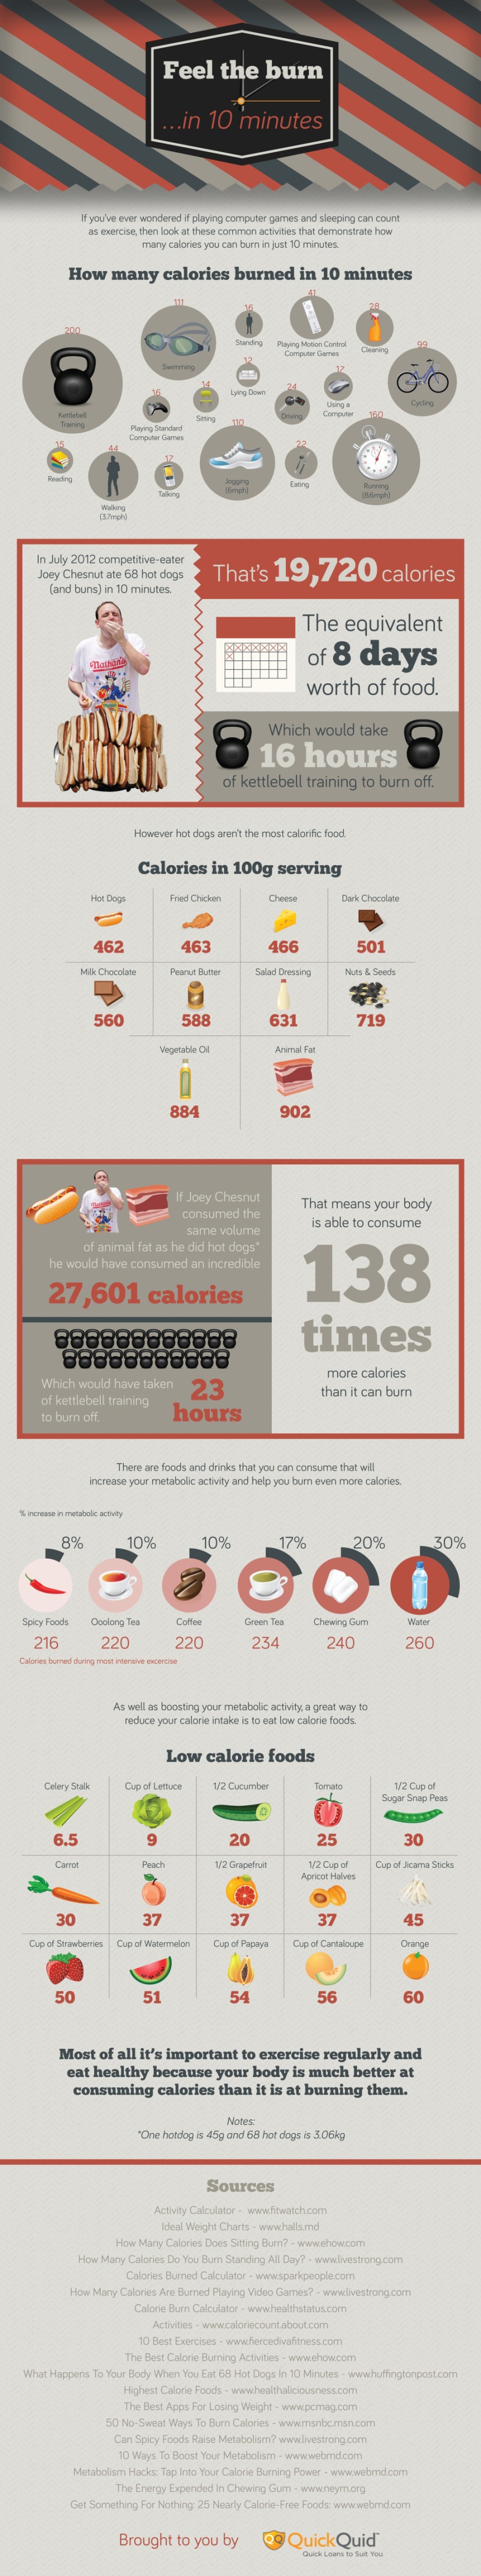 10-minute-exercises-calories-infographic